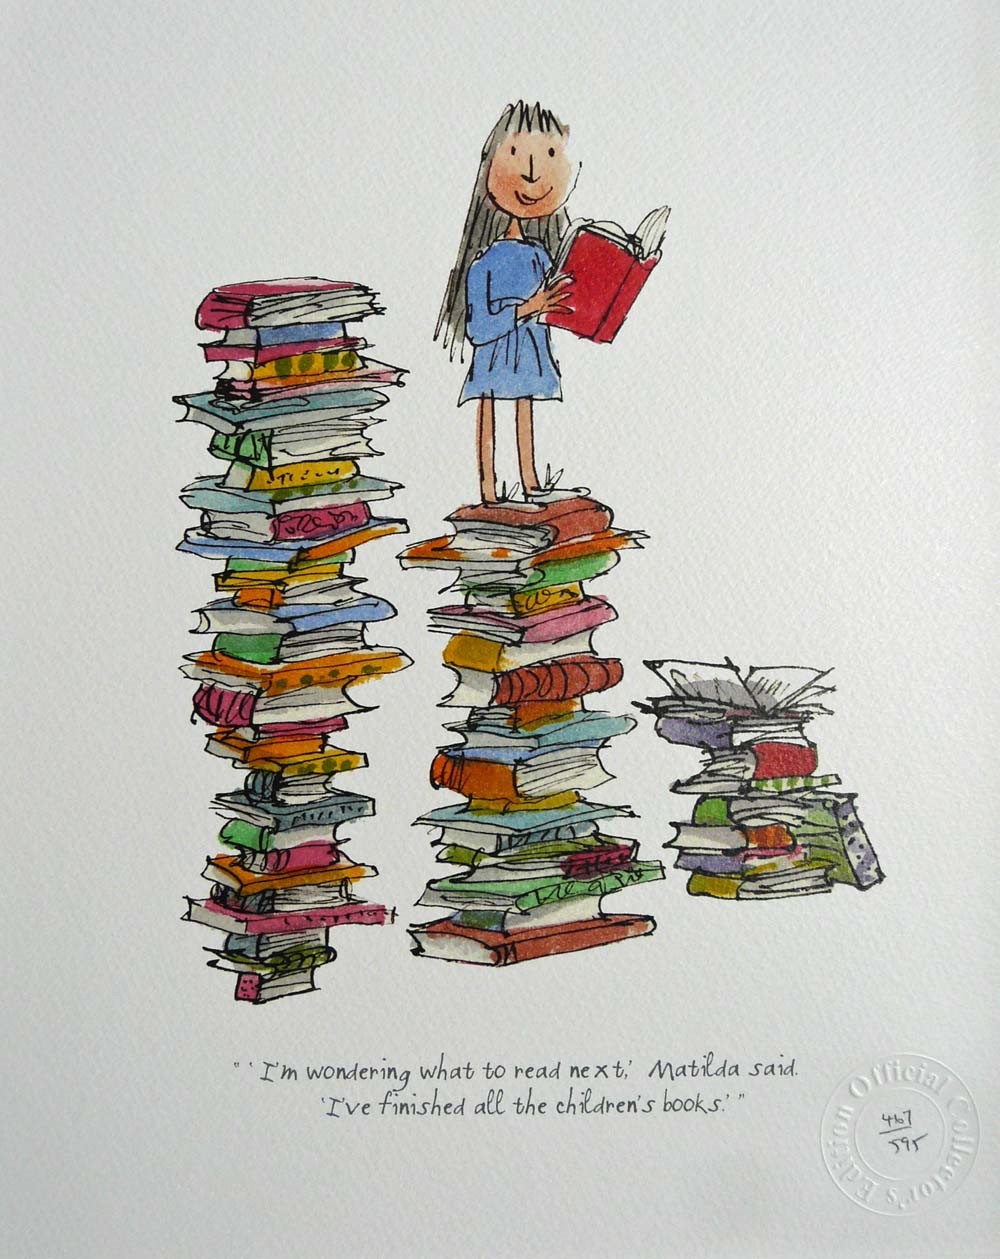 I'm wondering what to read next by Quentin Blake